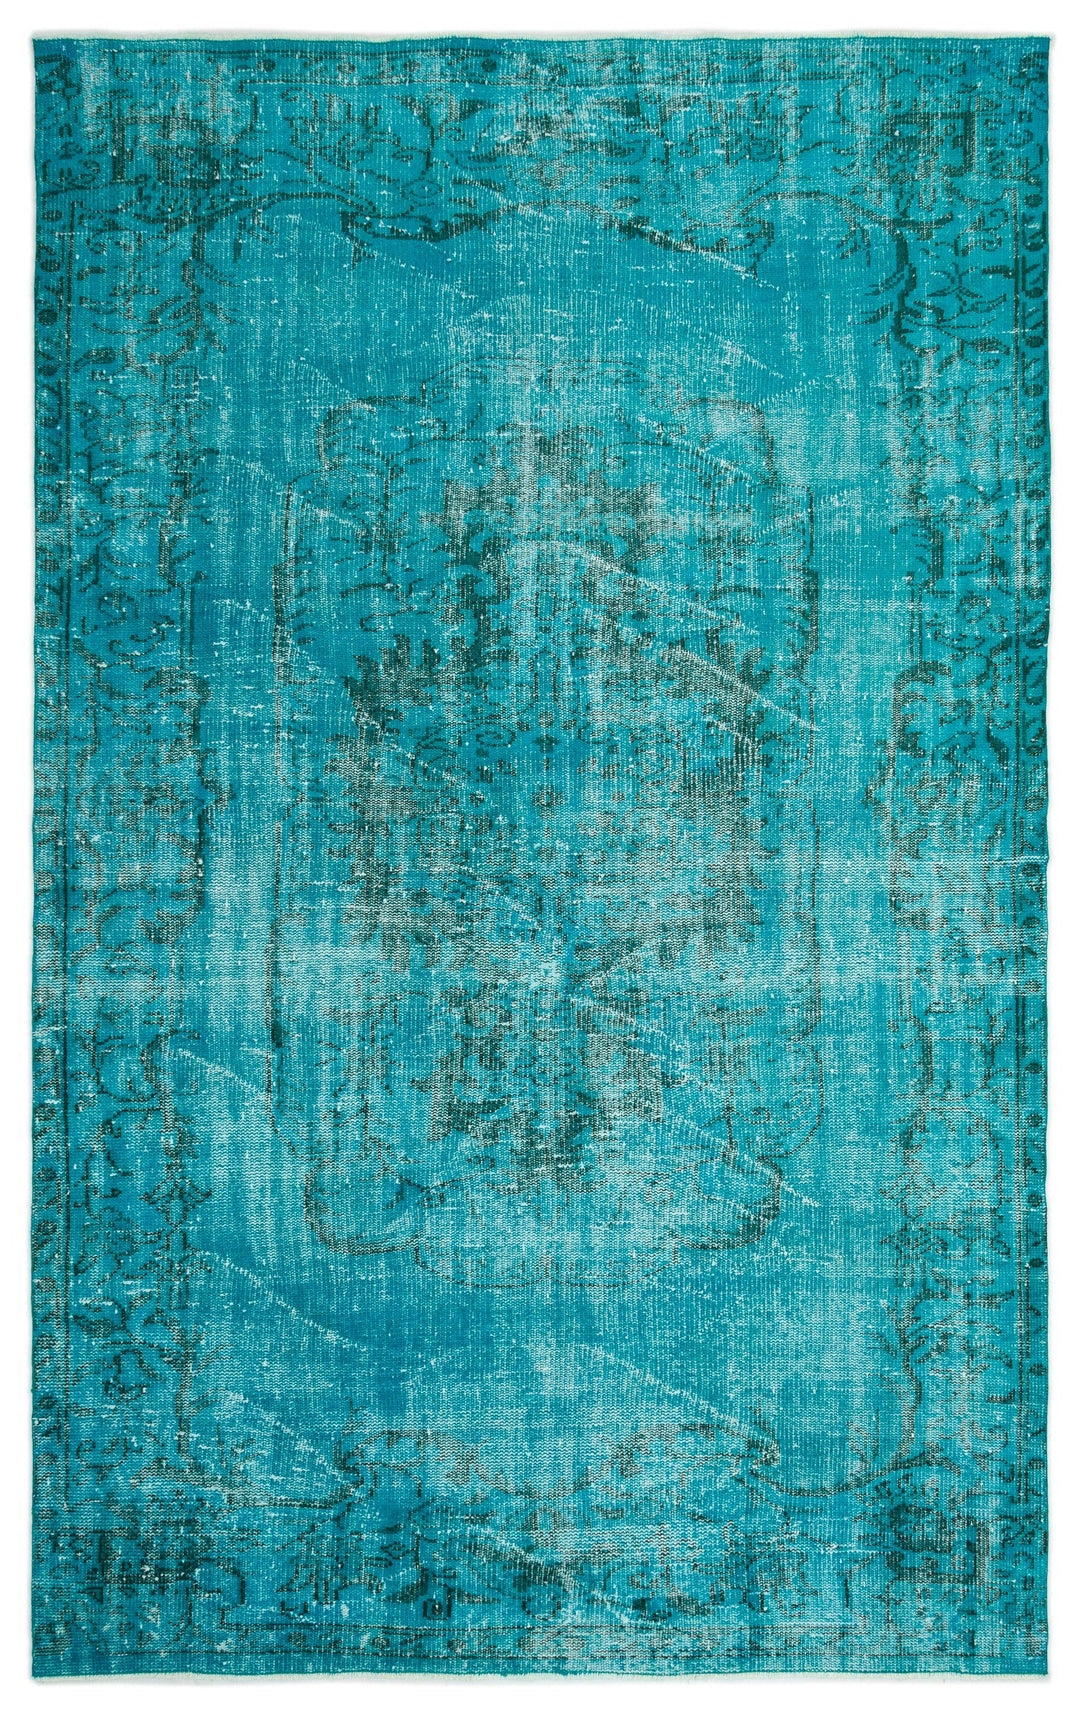 Athens Turquoise Tumbled Wool Hand Woven Carpet 185 x 284